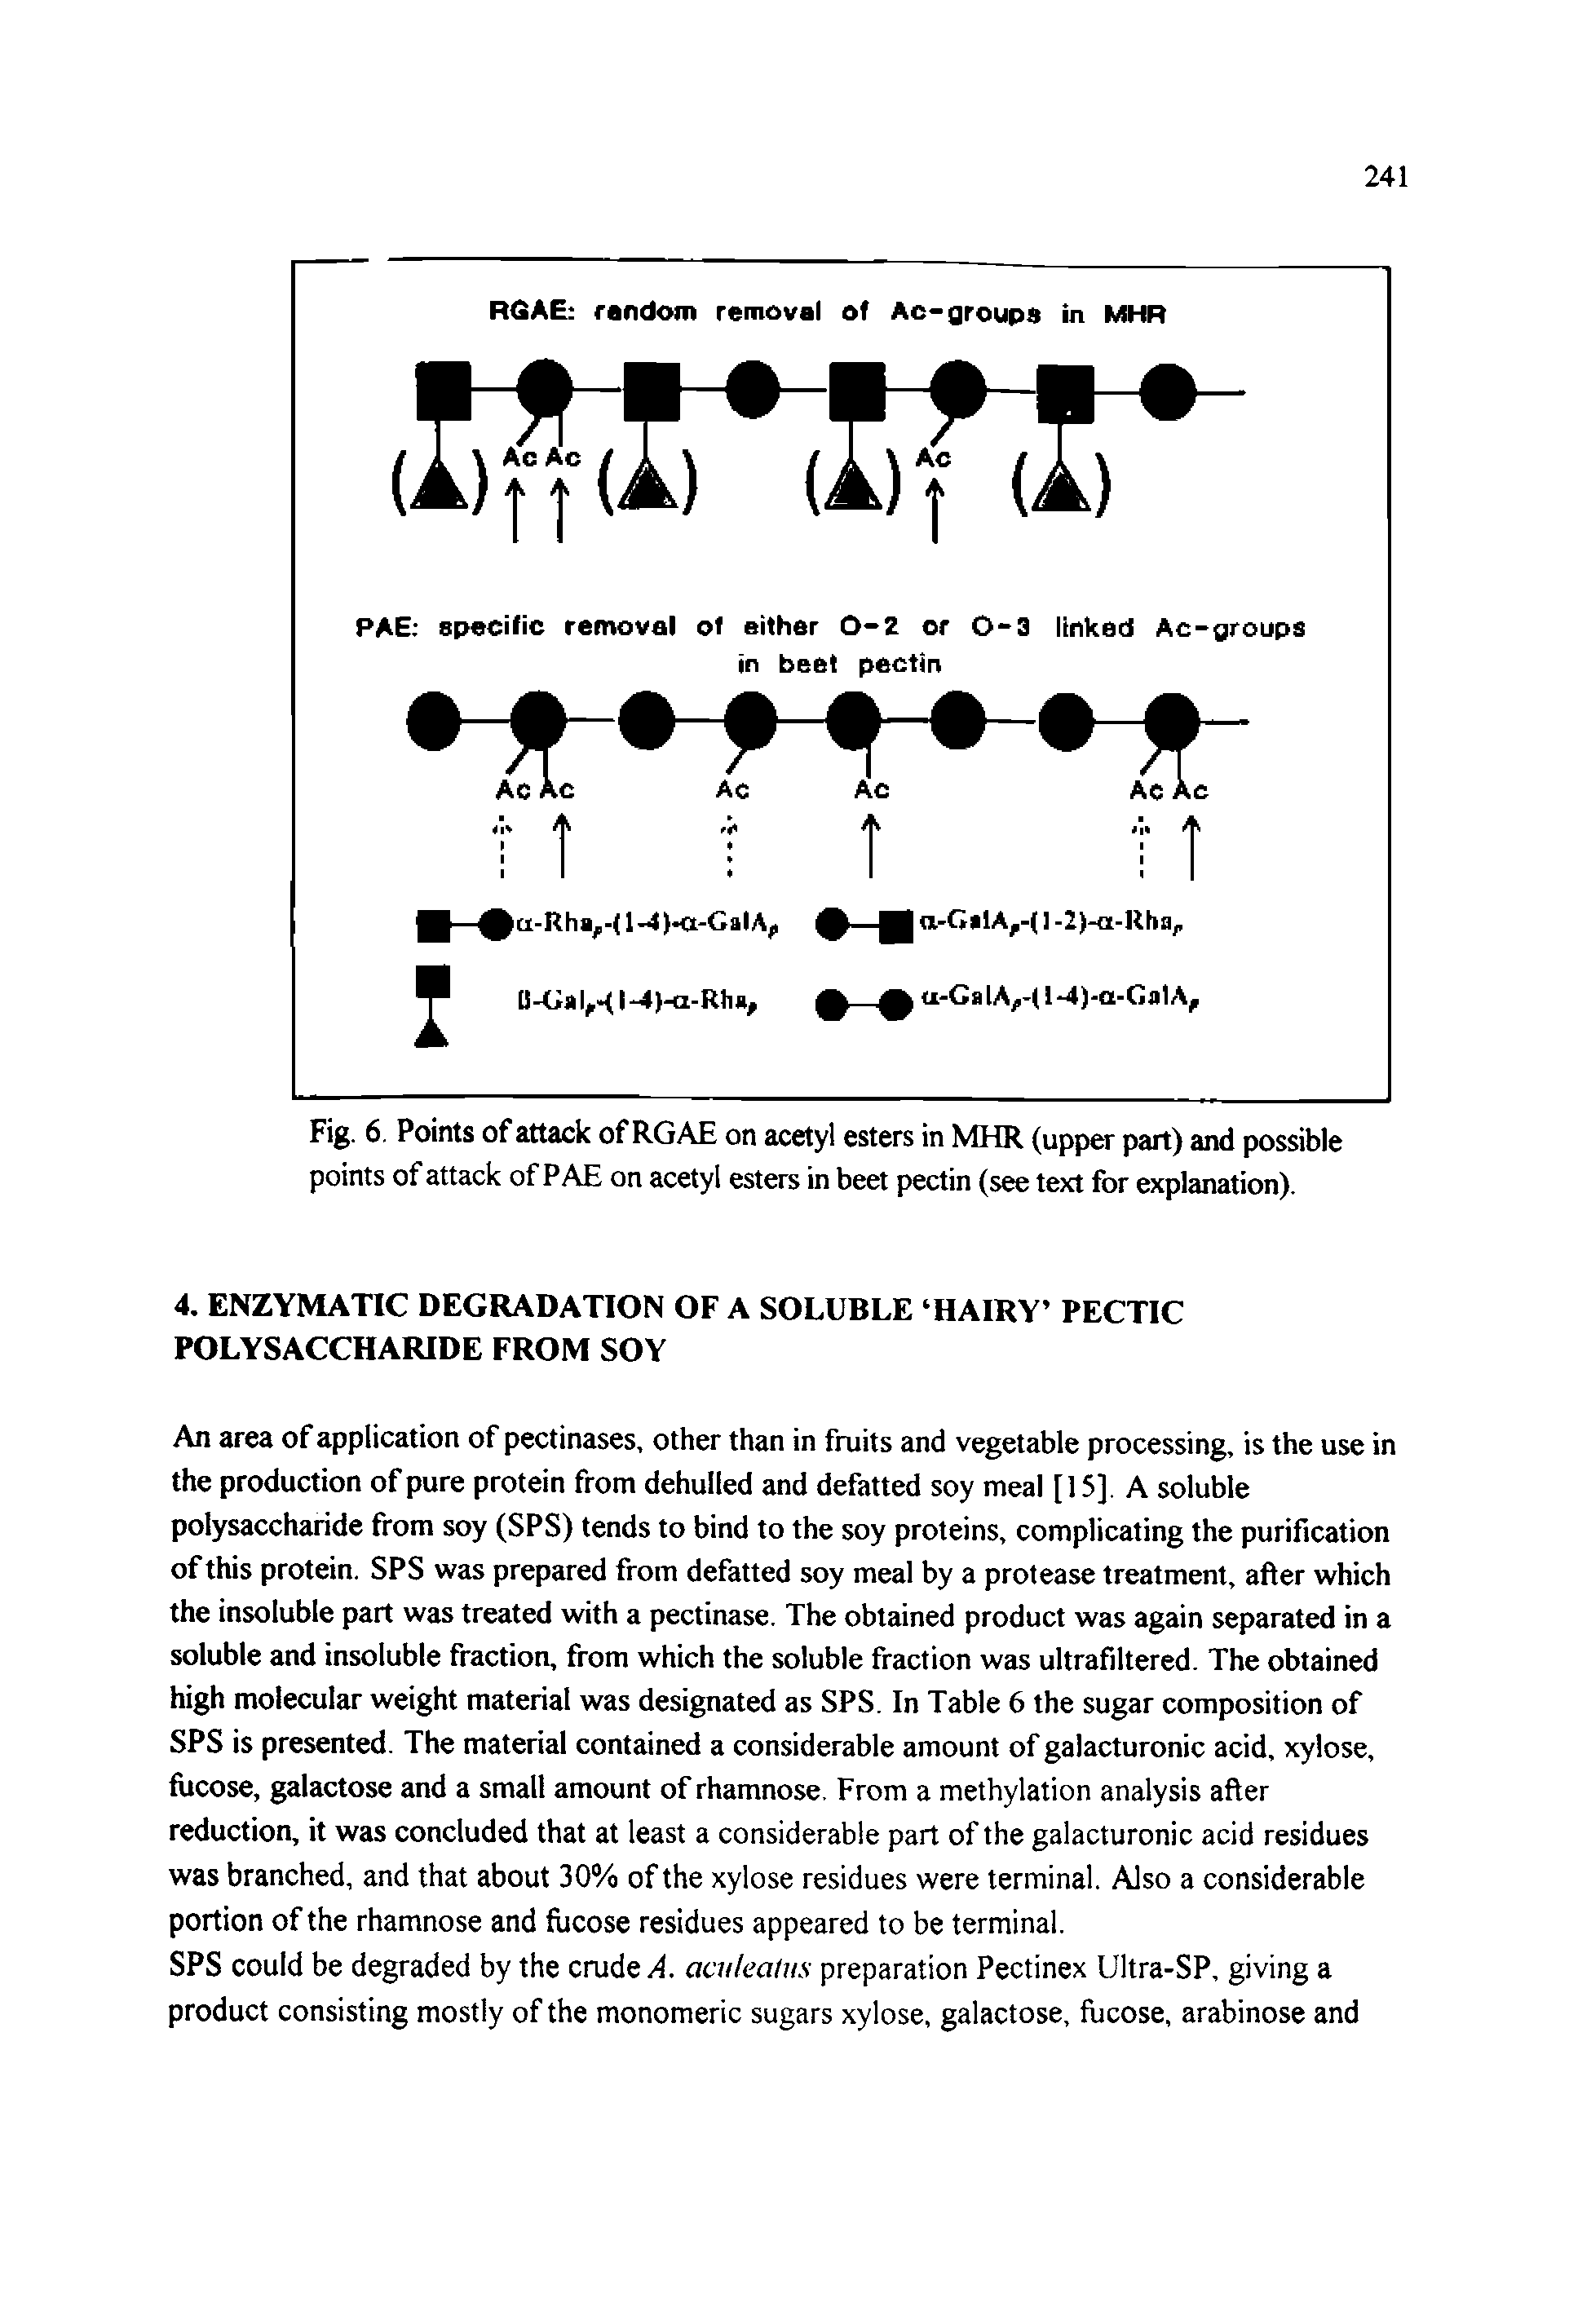 Fig. 6. Points of attack of RGAE on acetyl esters in MHR (upper part) and possible points of attack of PAE on acetyl esters in beet pectin (see text for explanation).